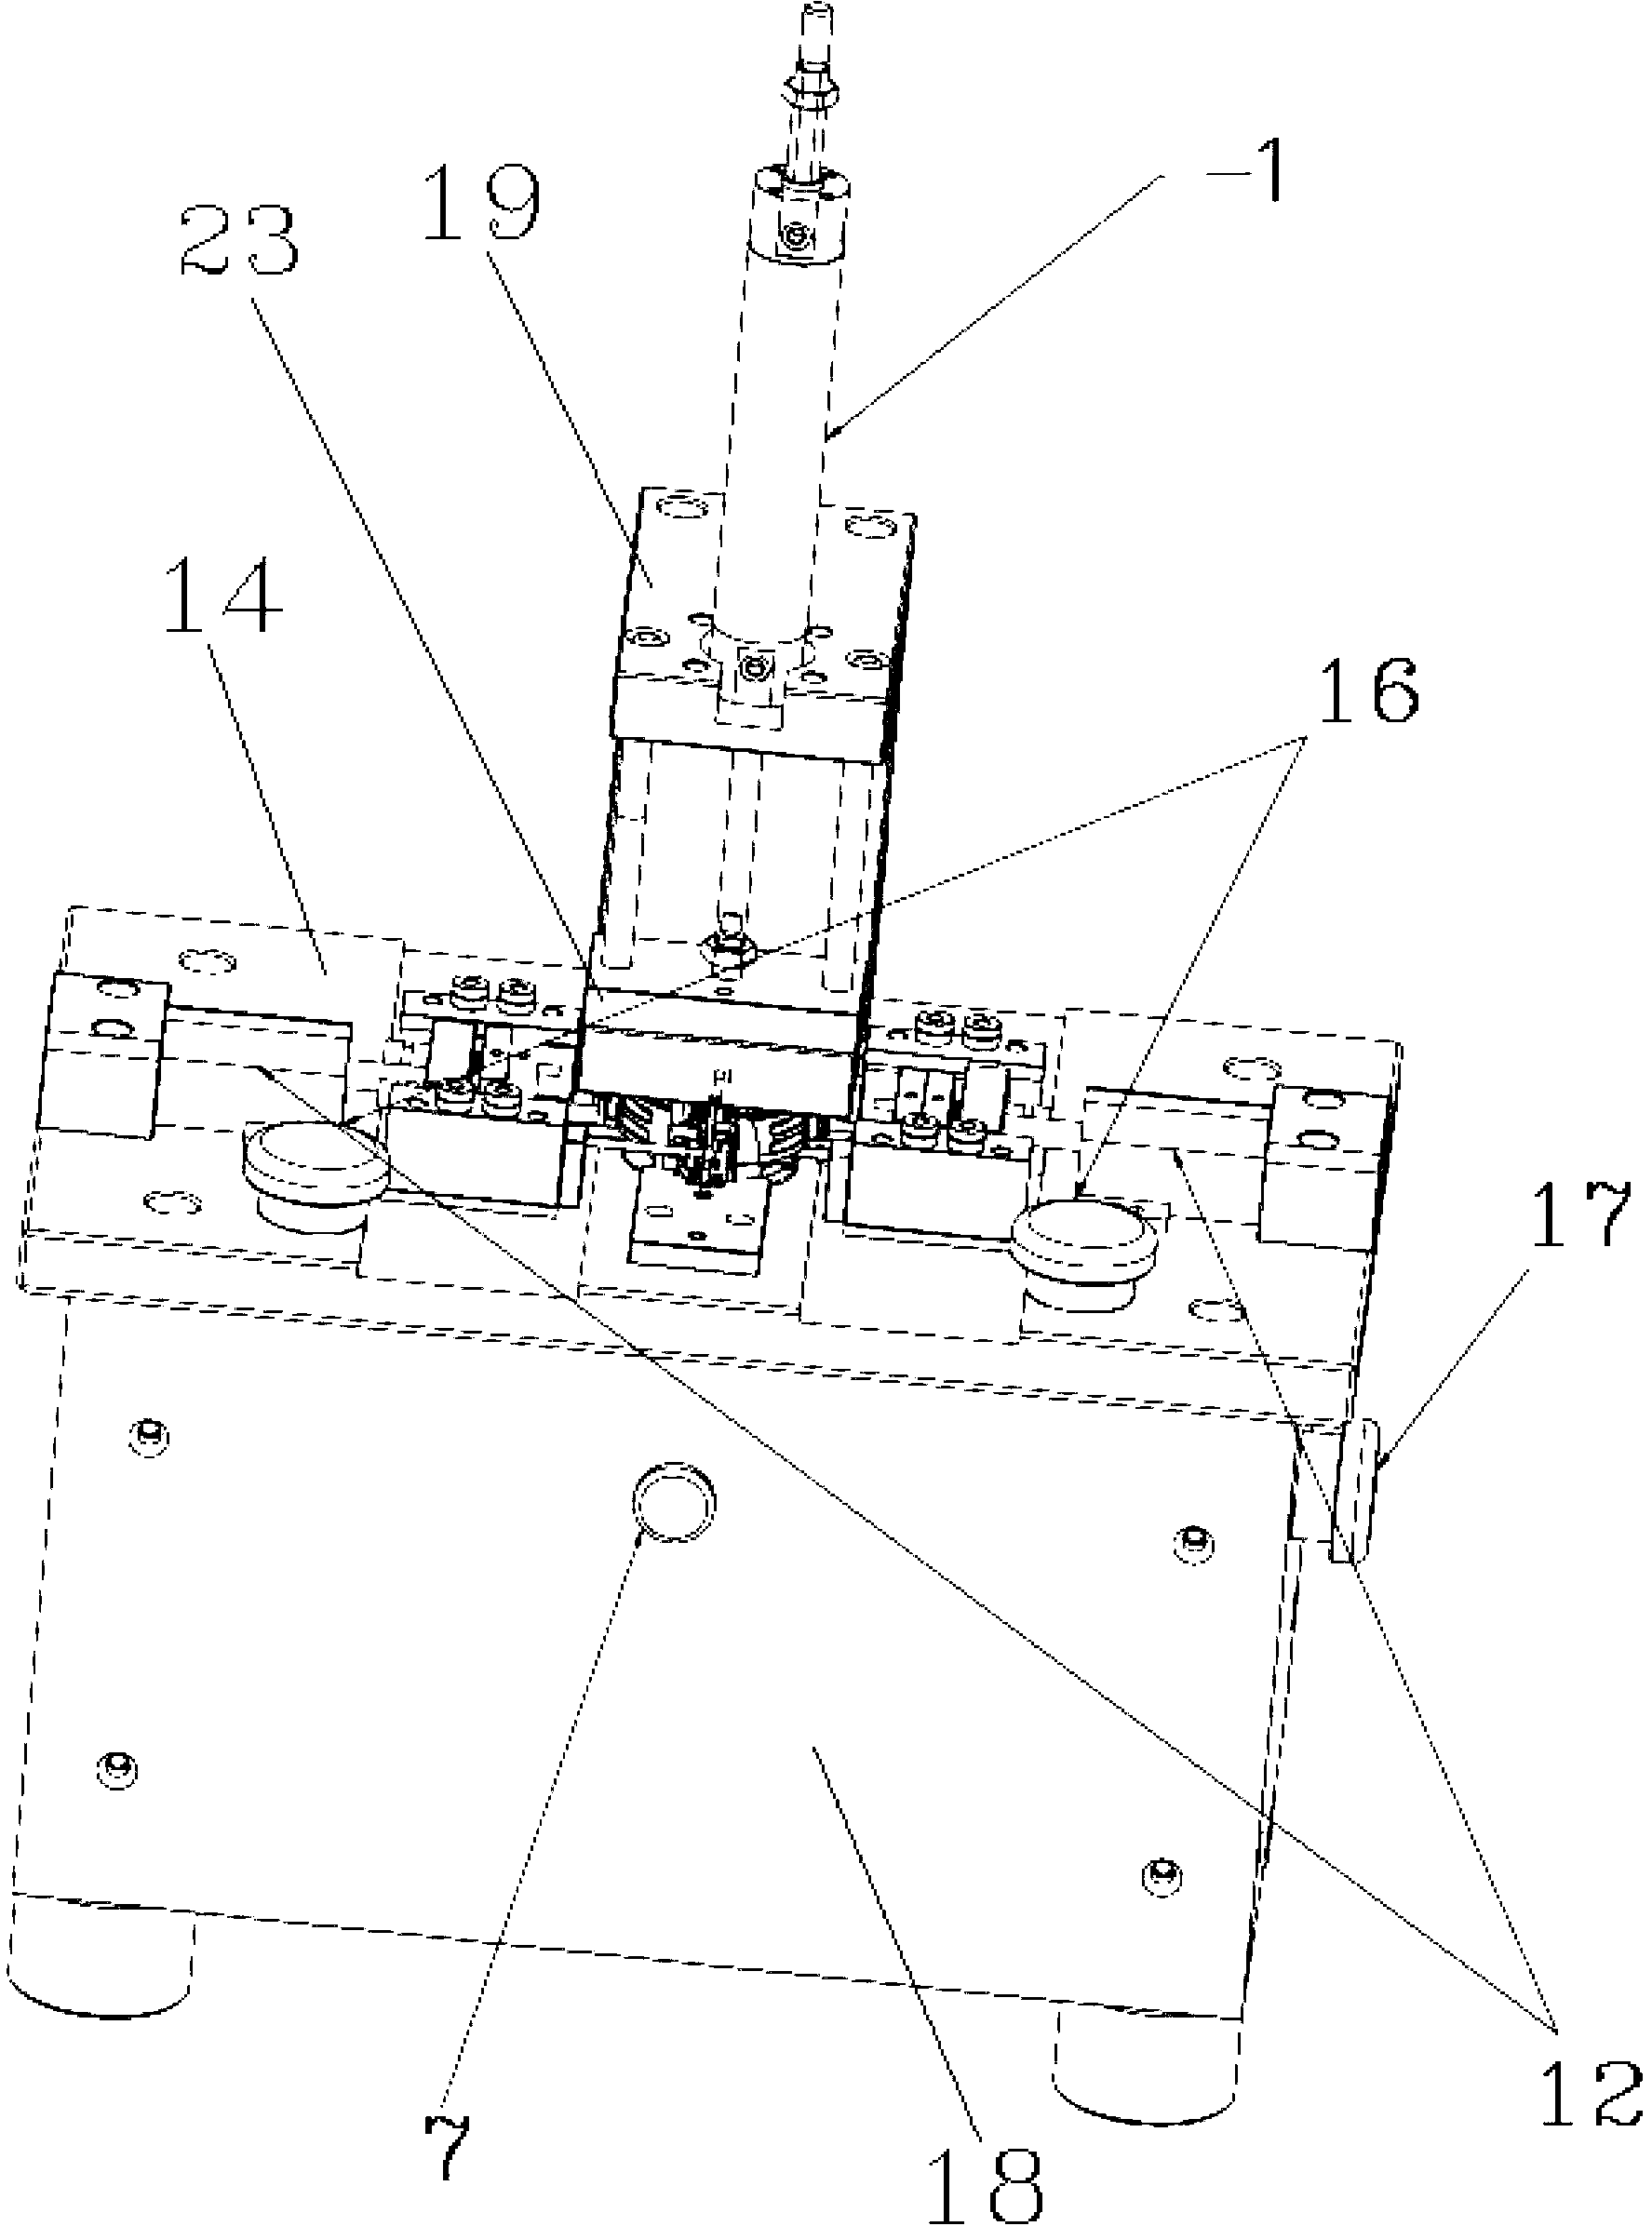 Device for automatically detecting whether components are left out of installation